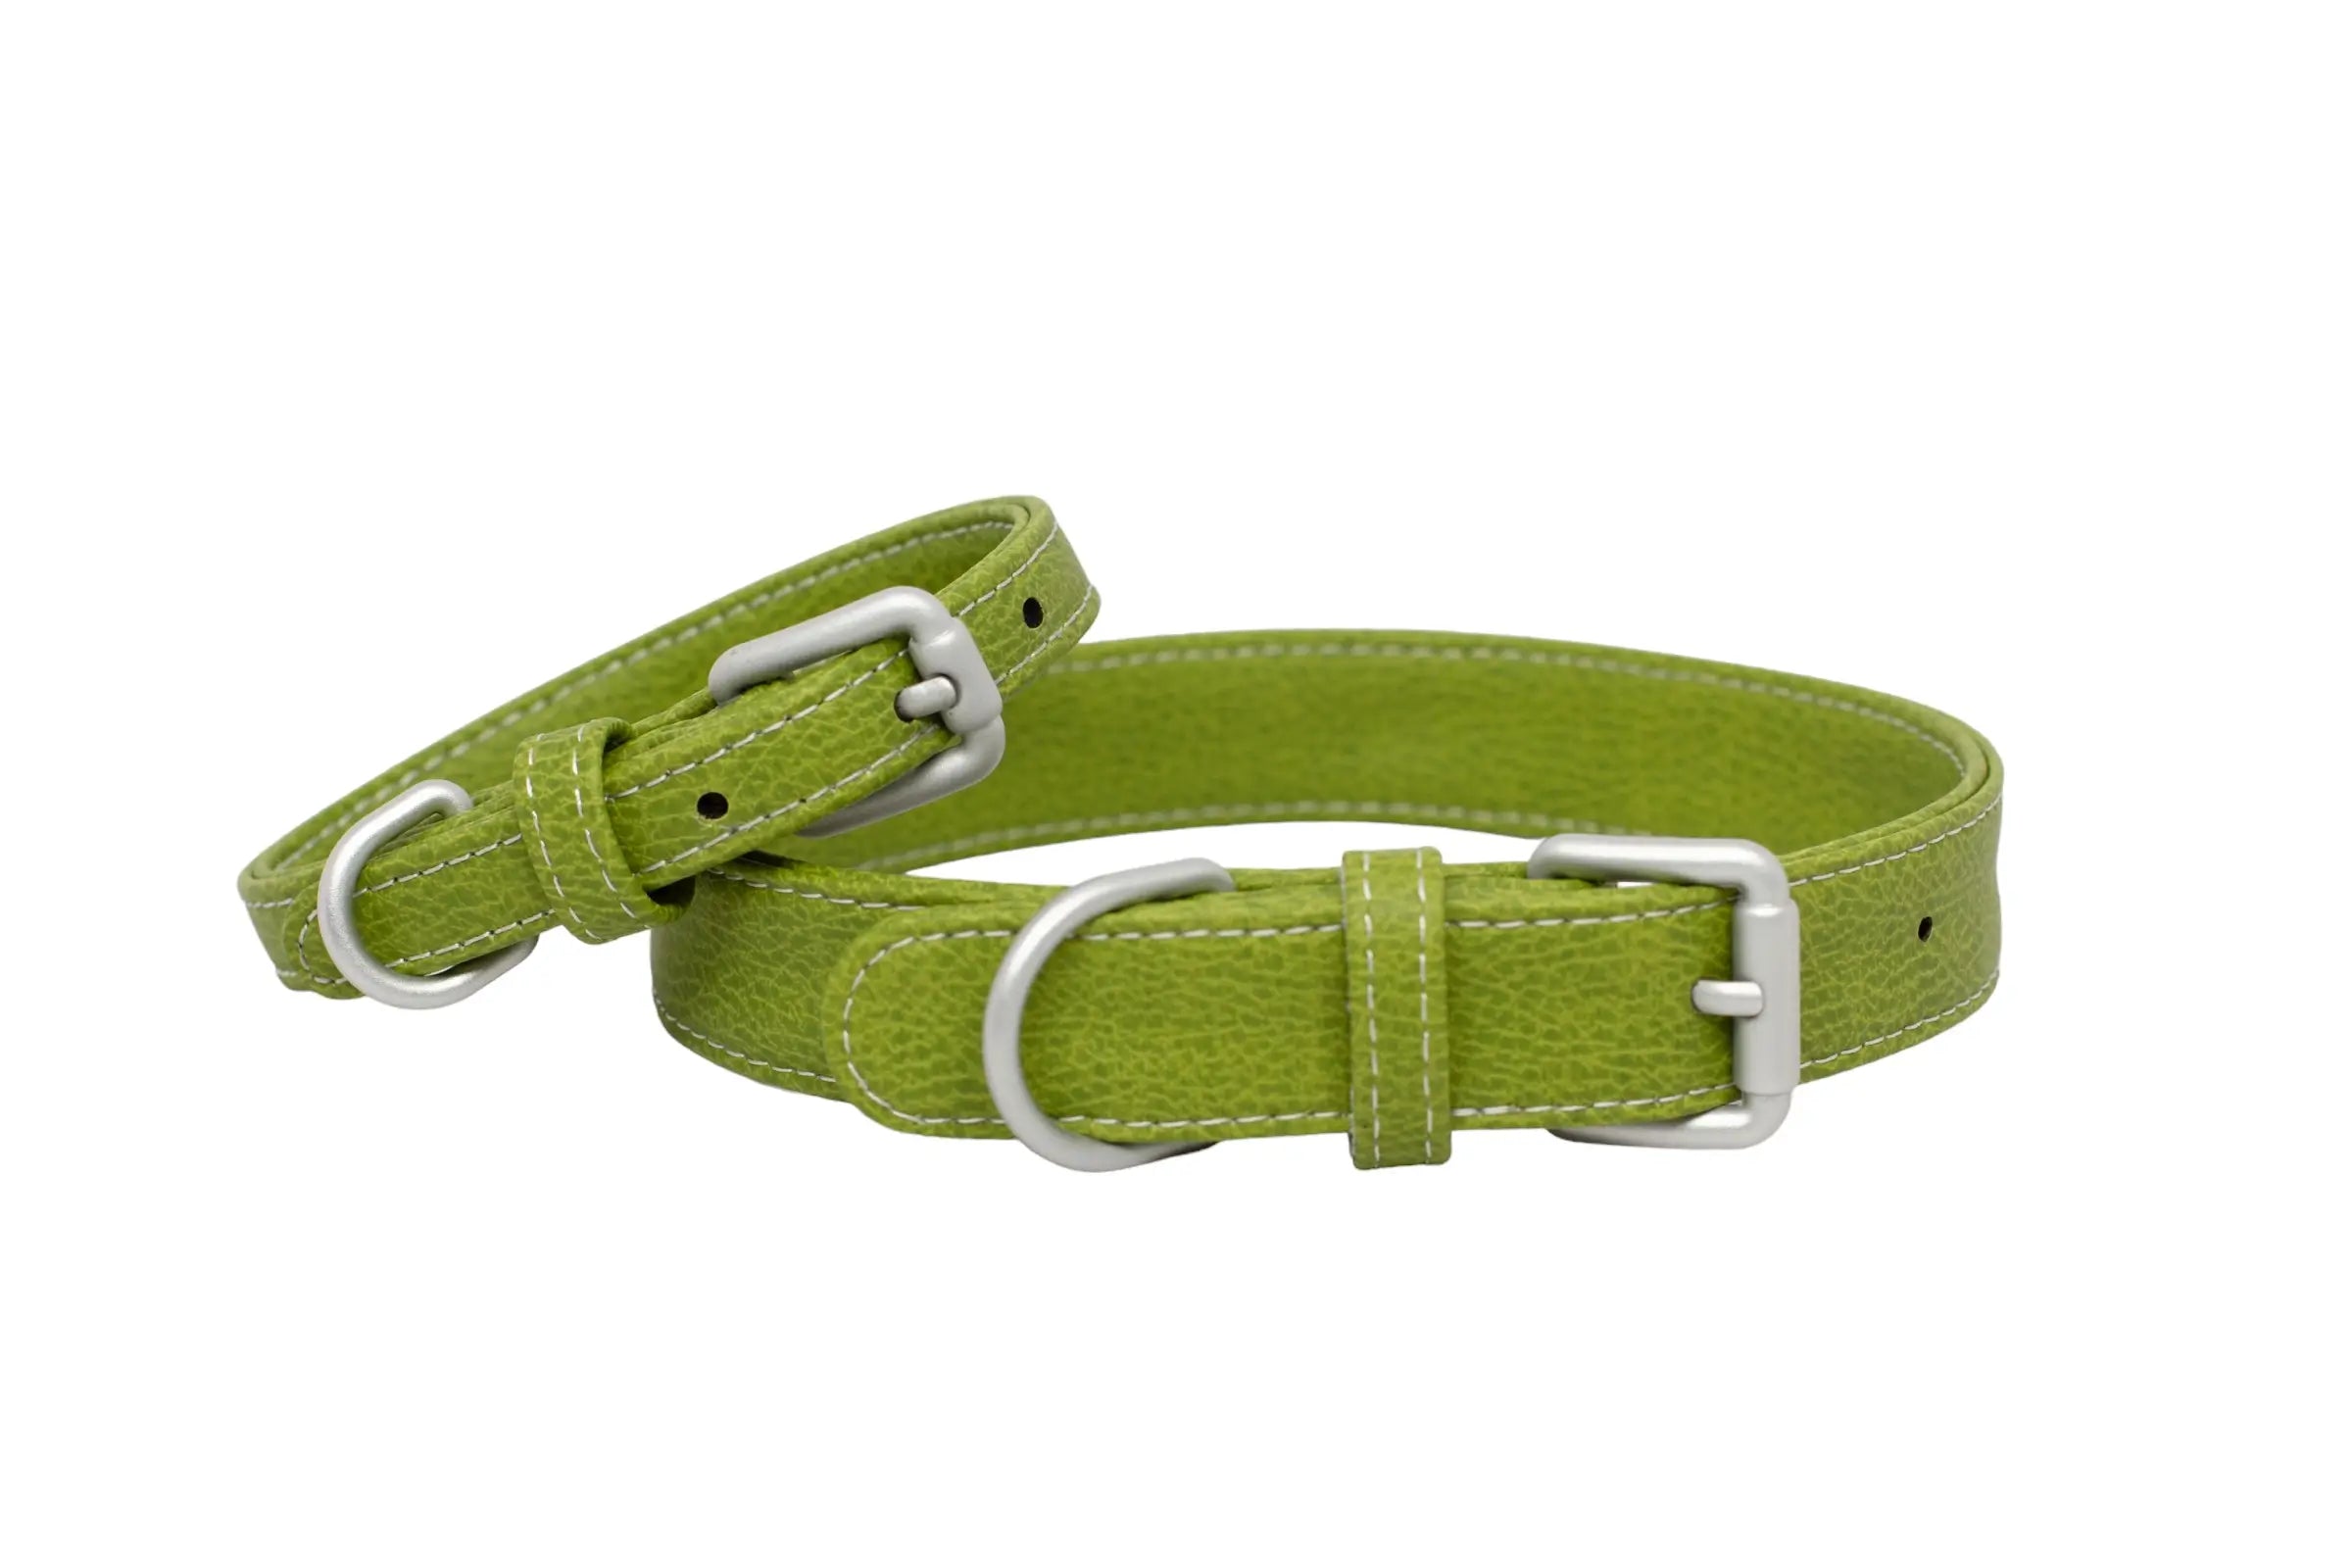 Front of two waterproof and durable dog collars with vegan leather and marine grade anodized aluminum hardware in the color lime green.